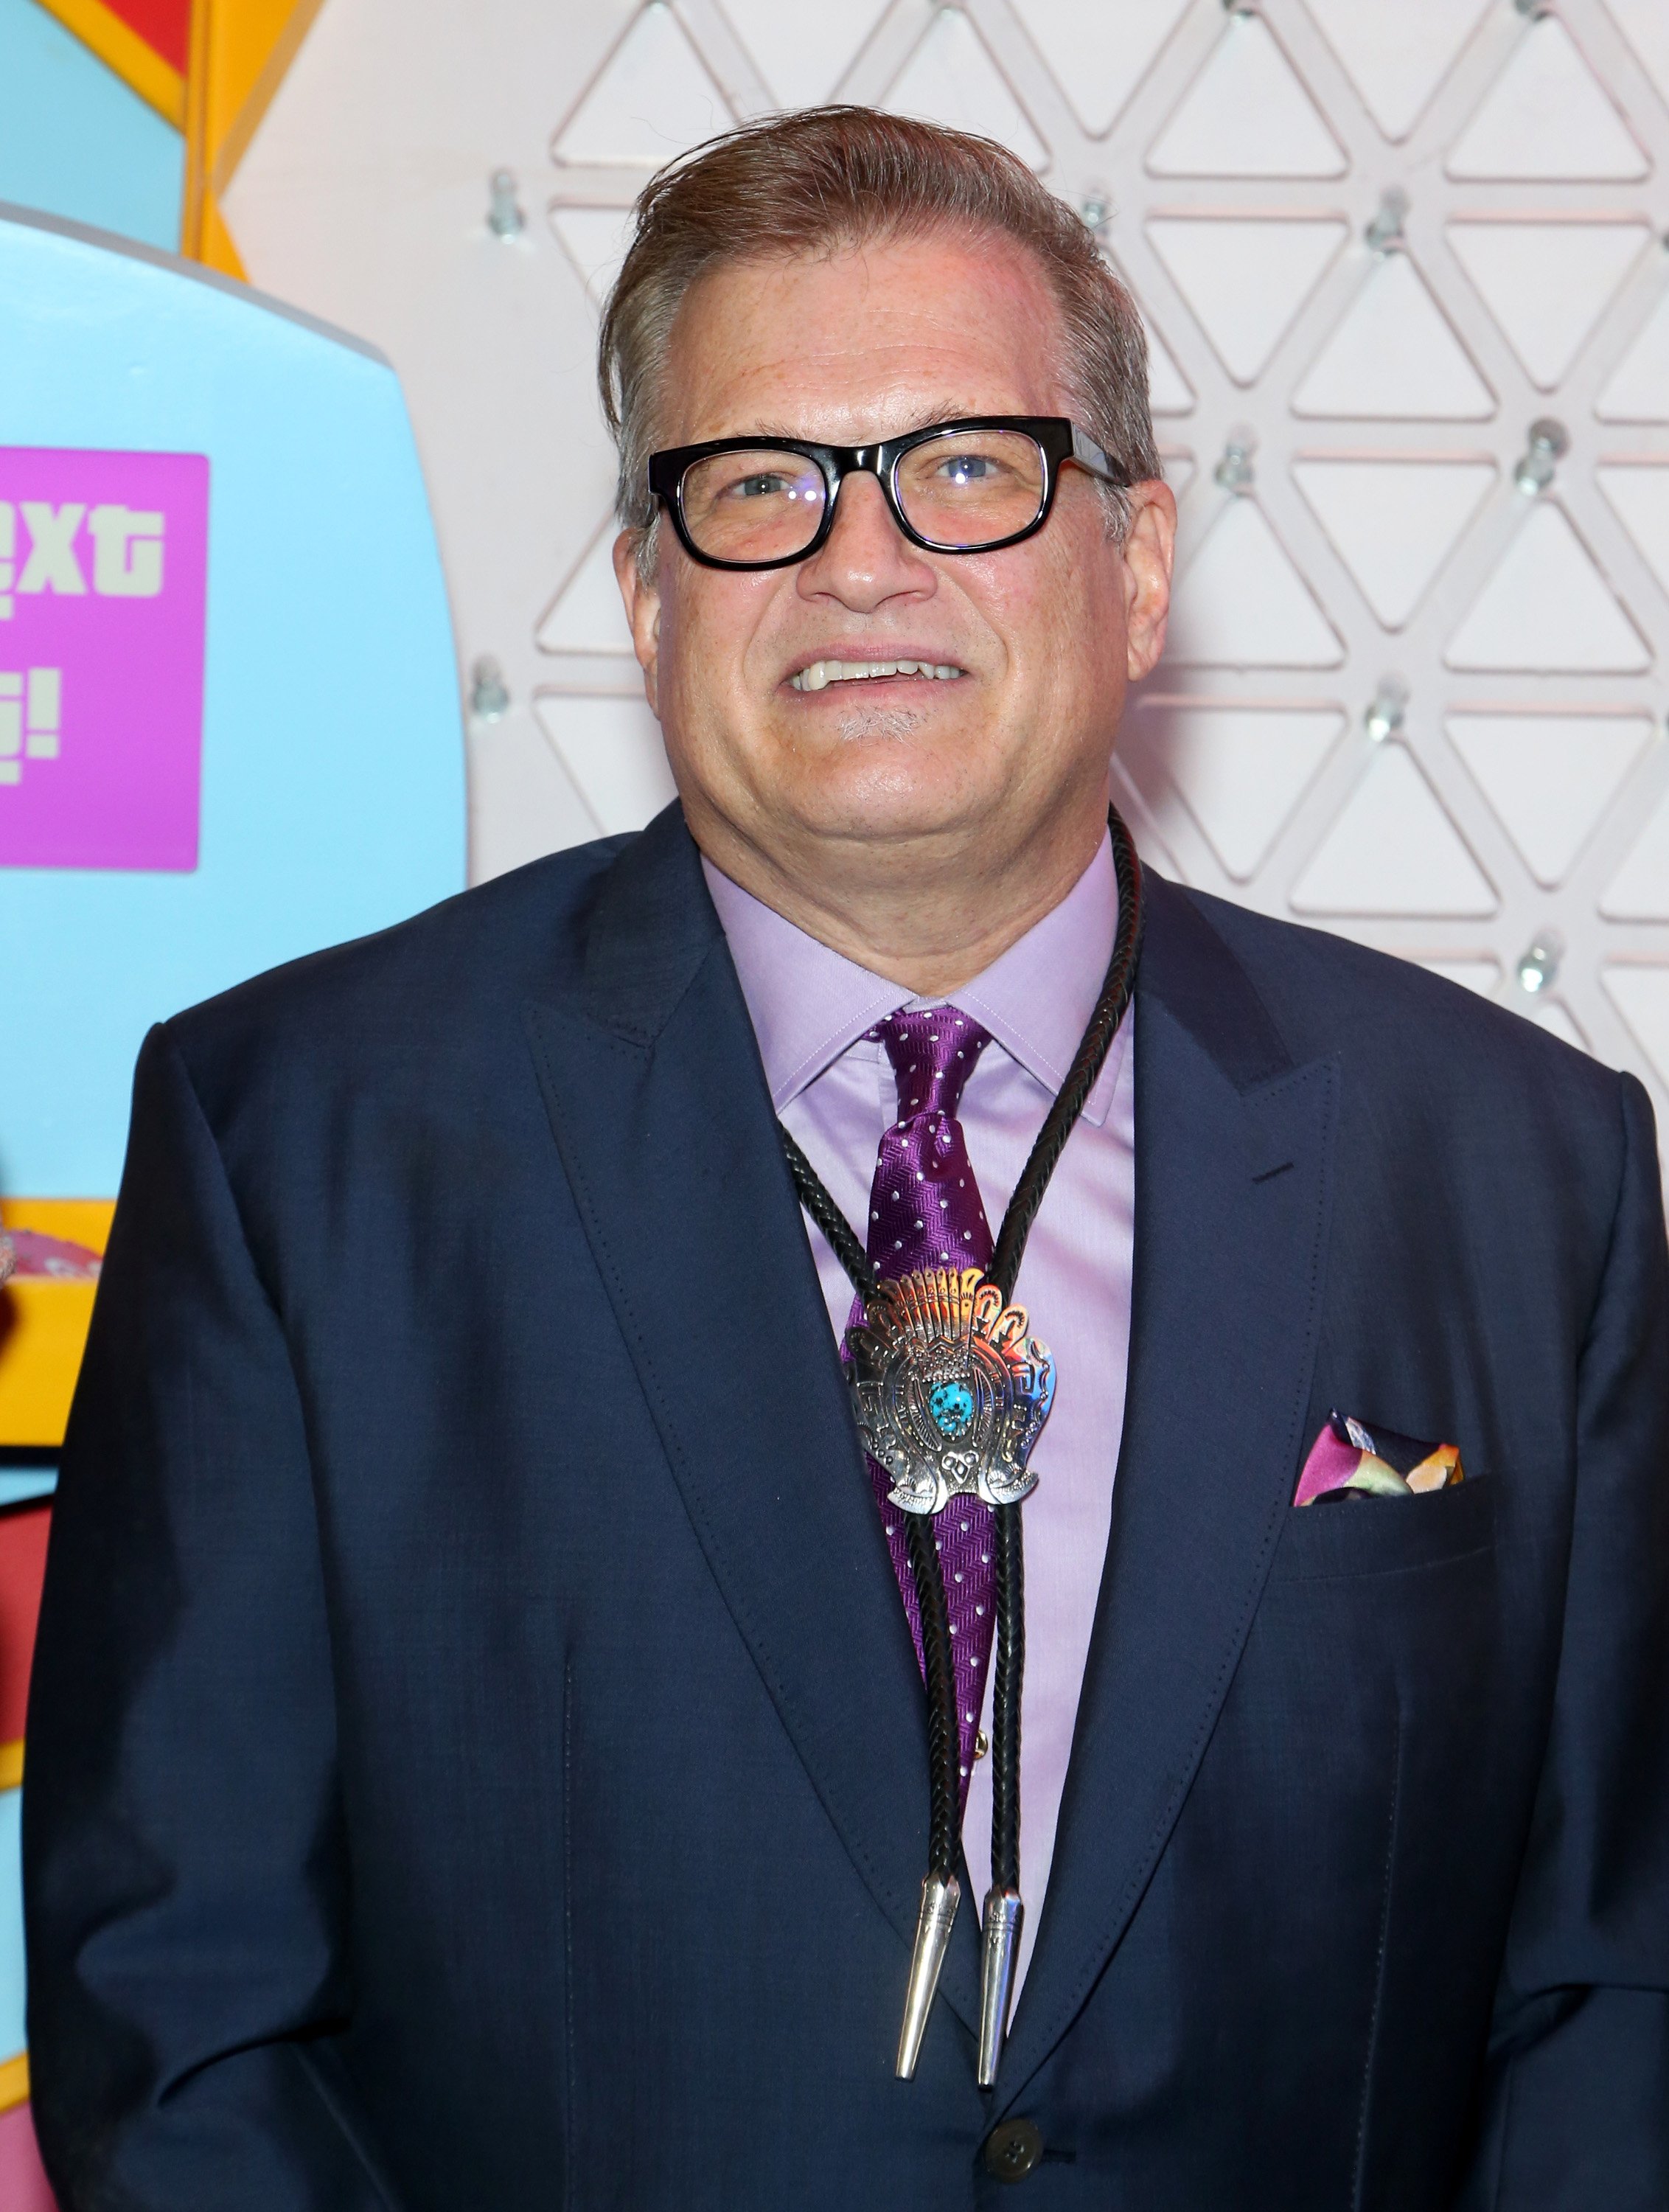 Drew Carey stands in front of a Plinko game for the "Price is Right" Slot Machines announcement in Las Vegas, Nevada on October 10, 2018 | Photo: Getty Images